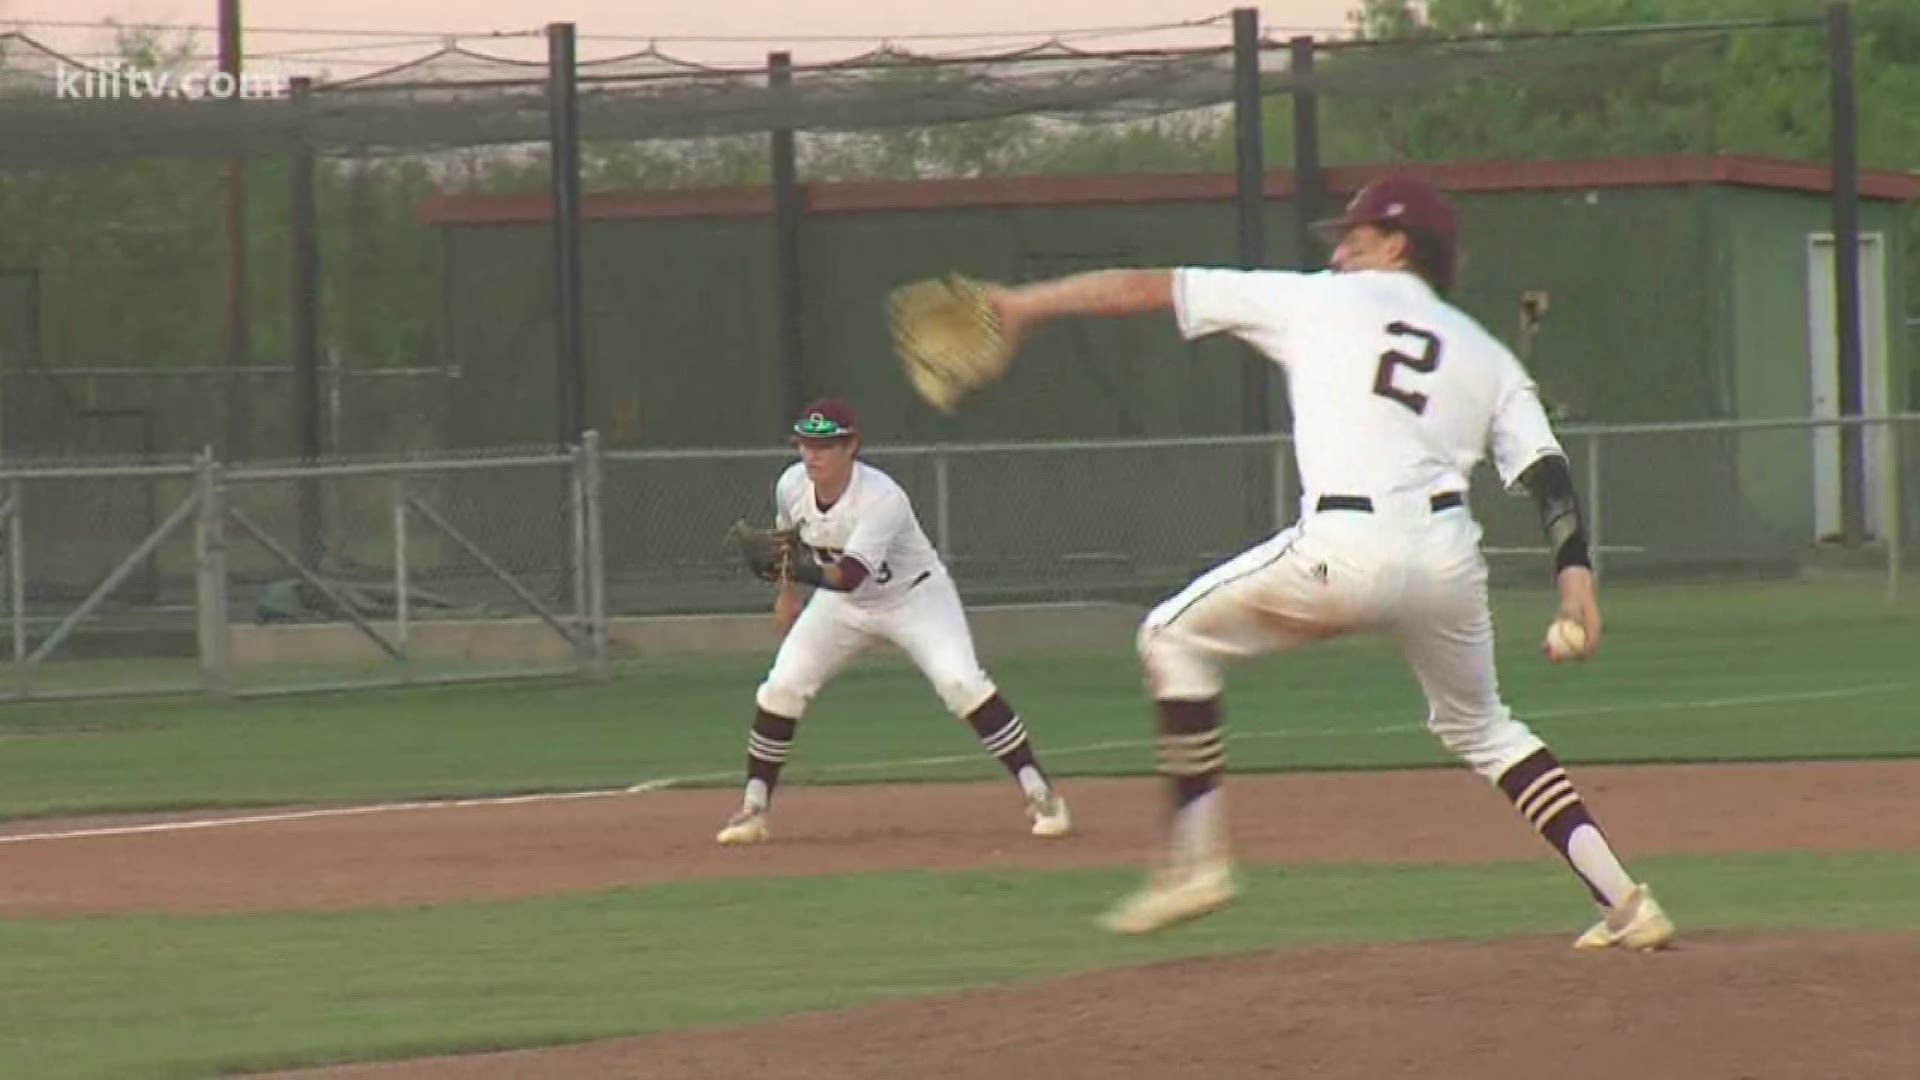 Highlights from three baseball games and a softball game in the Coastal Bend on Tuesday night.